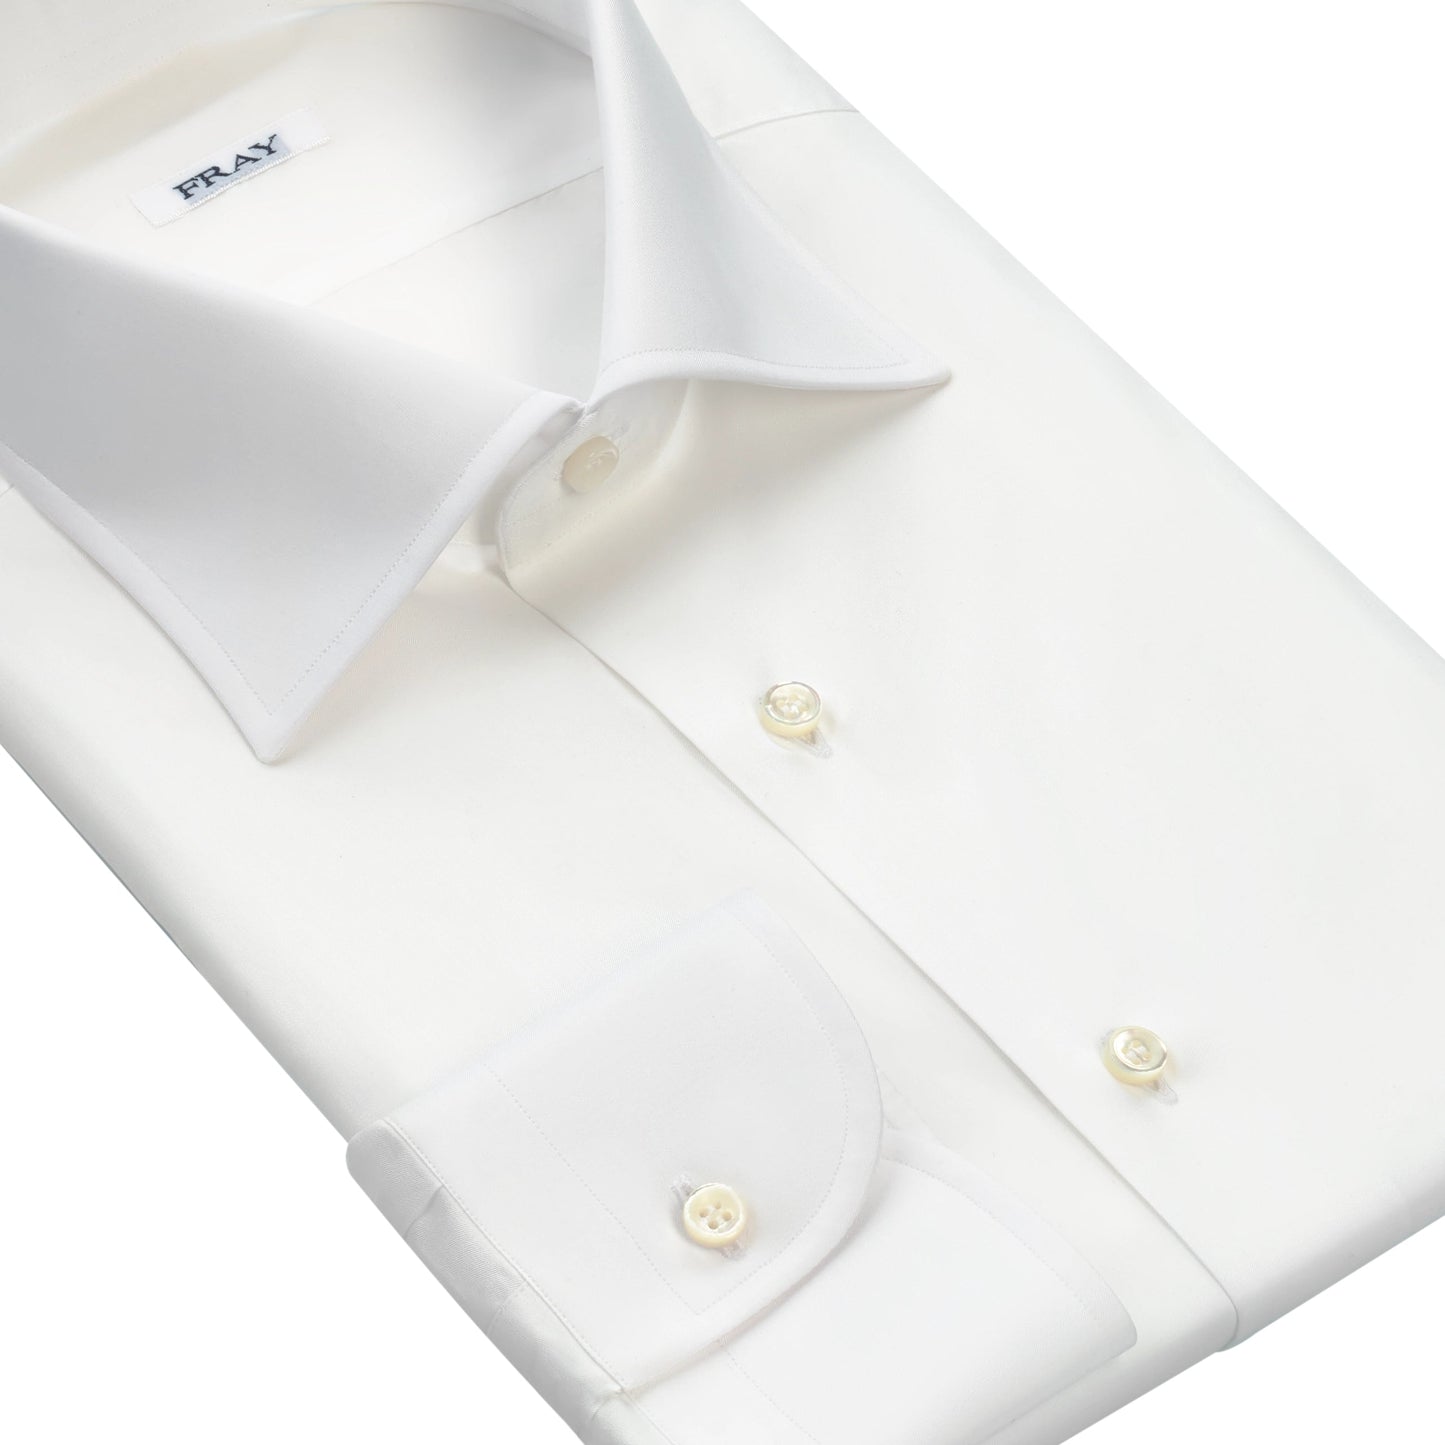 Fray Classic Cotton Shirt in White with Spread Collar - SARTALE